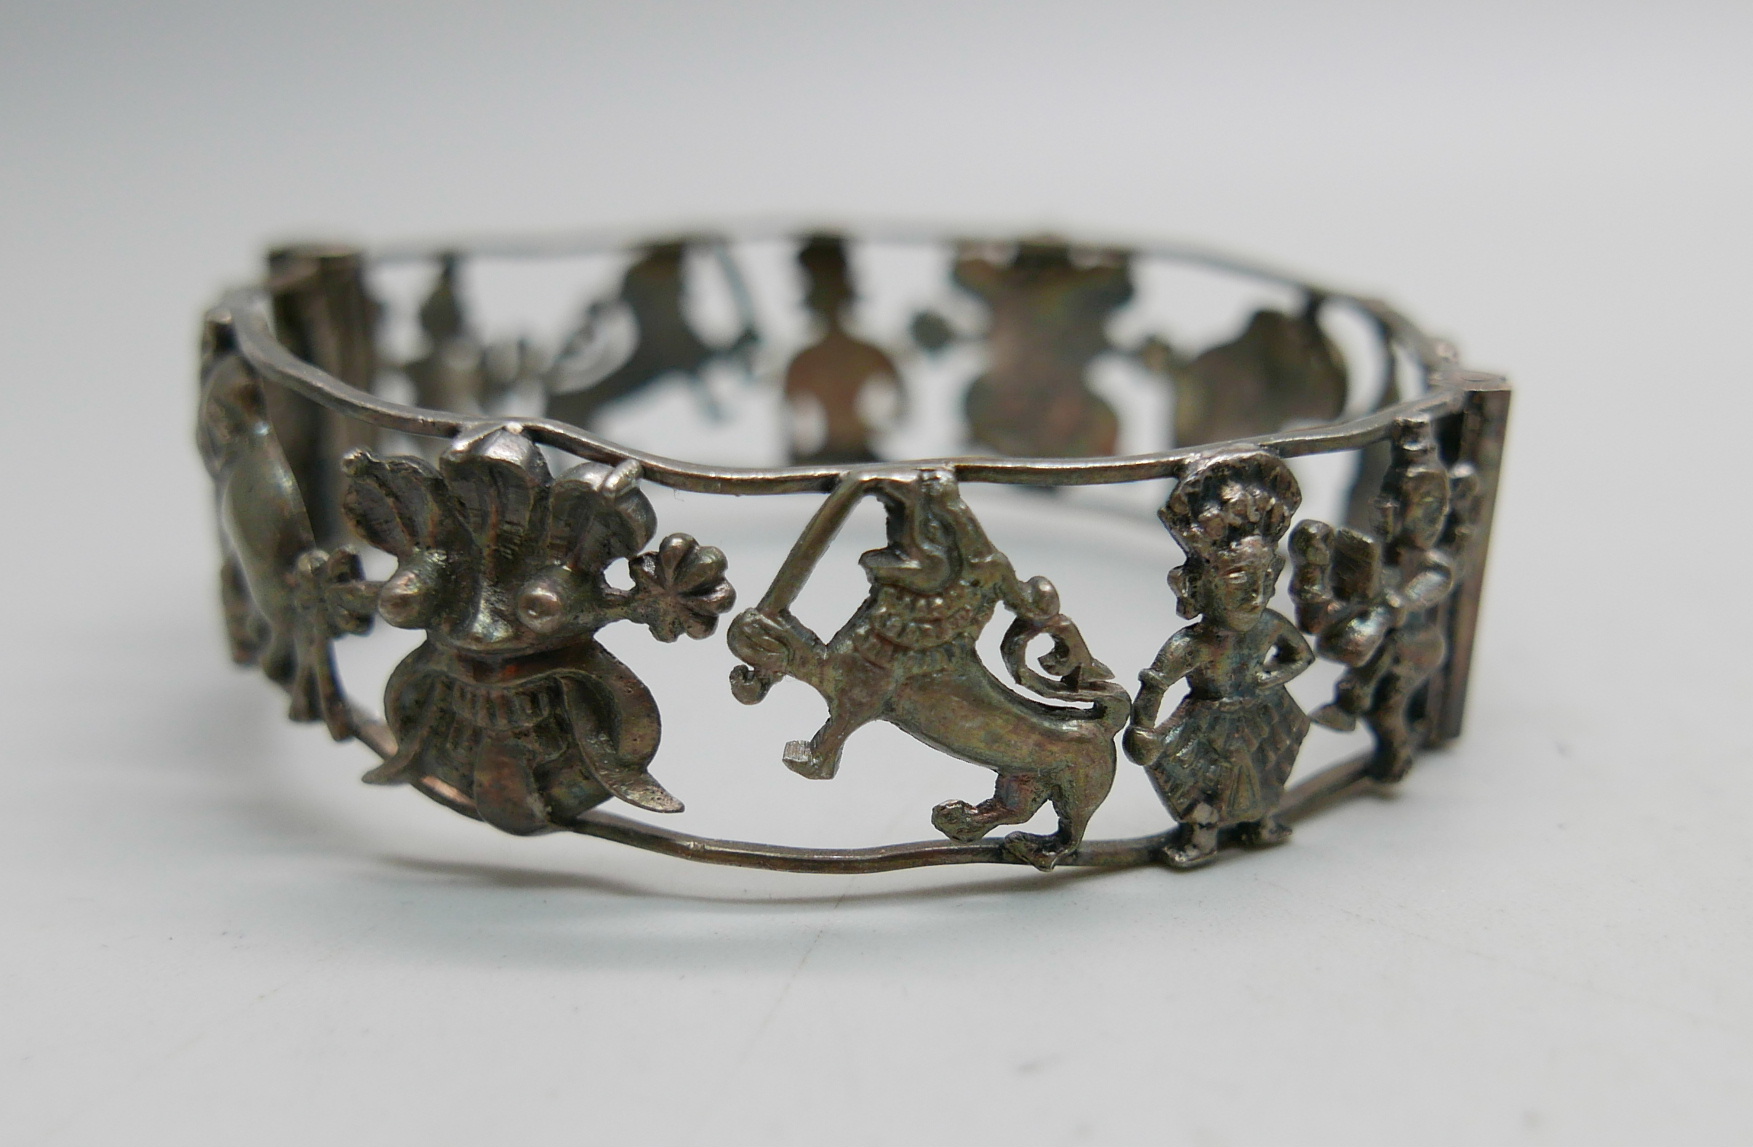 One vintage eastern inspired silver bangle with temples, elephants, etc., and a silver cable - Image 2 of 4